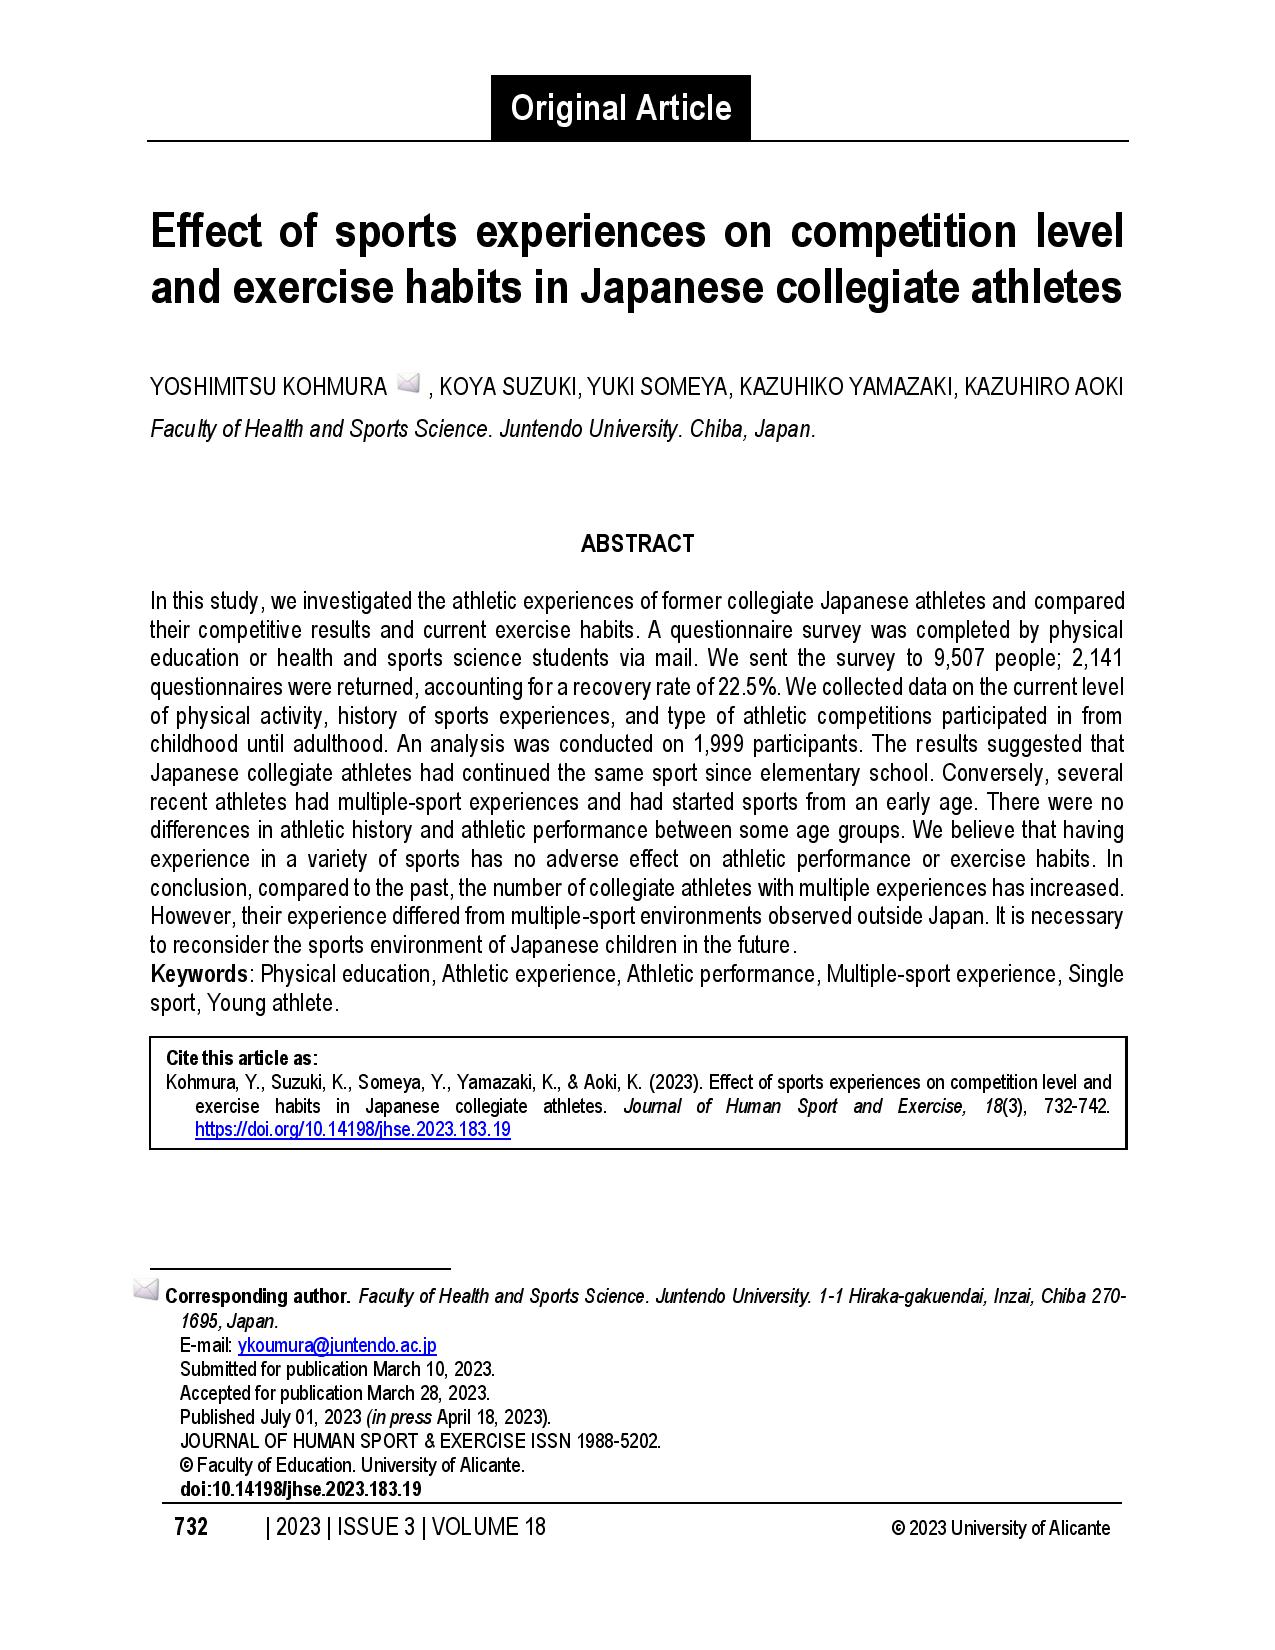 Effect of sports experiences on competition level and exercise habits in Japanese collegiate athletes